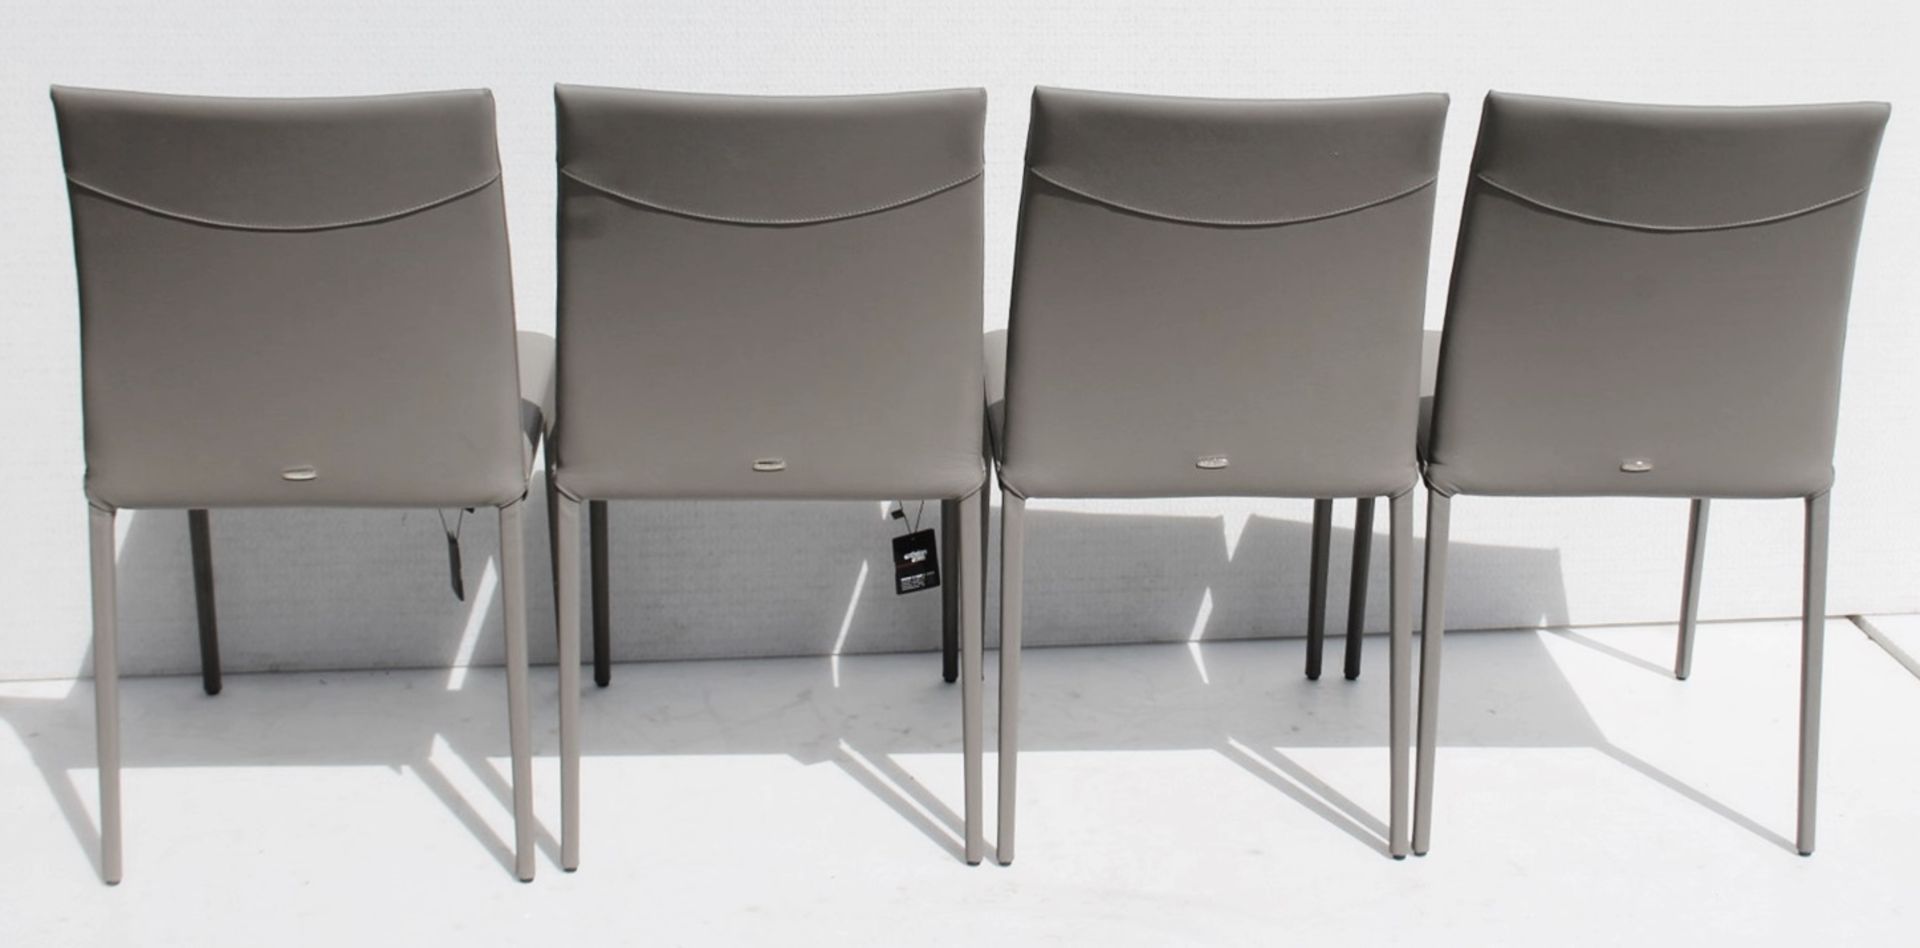 4 x CATELLAN 'Norma' Designer Italian Dining Chairs In Soft Grey Leather - Original RRP £3,840 - Image 7 of 7